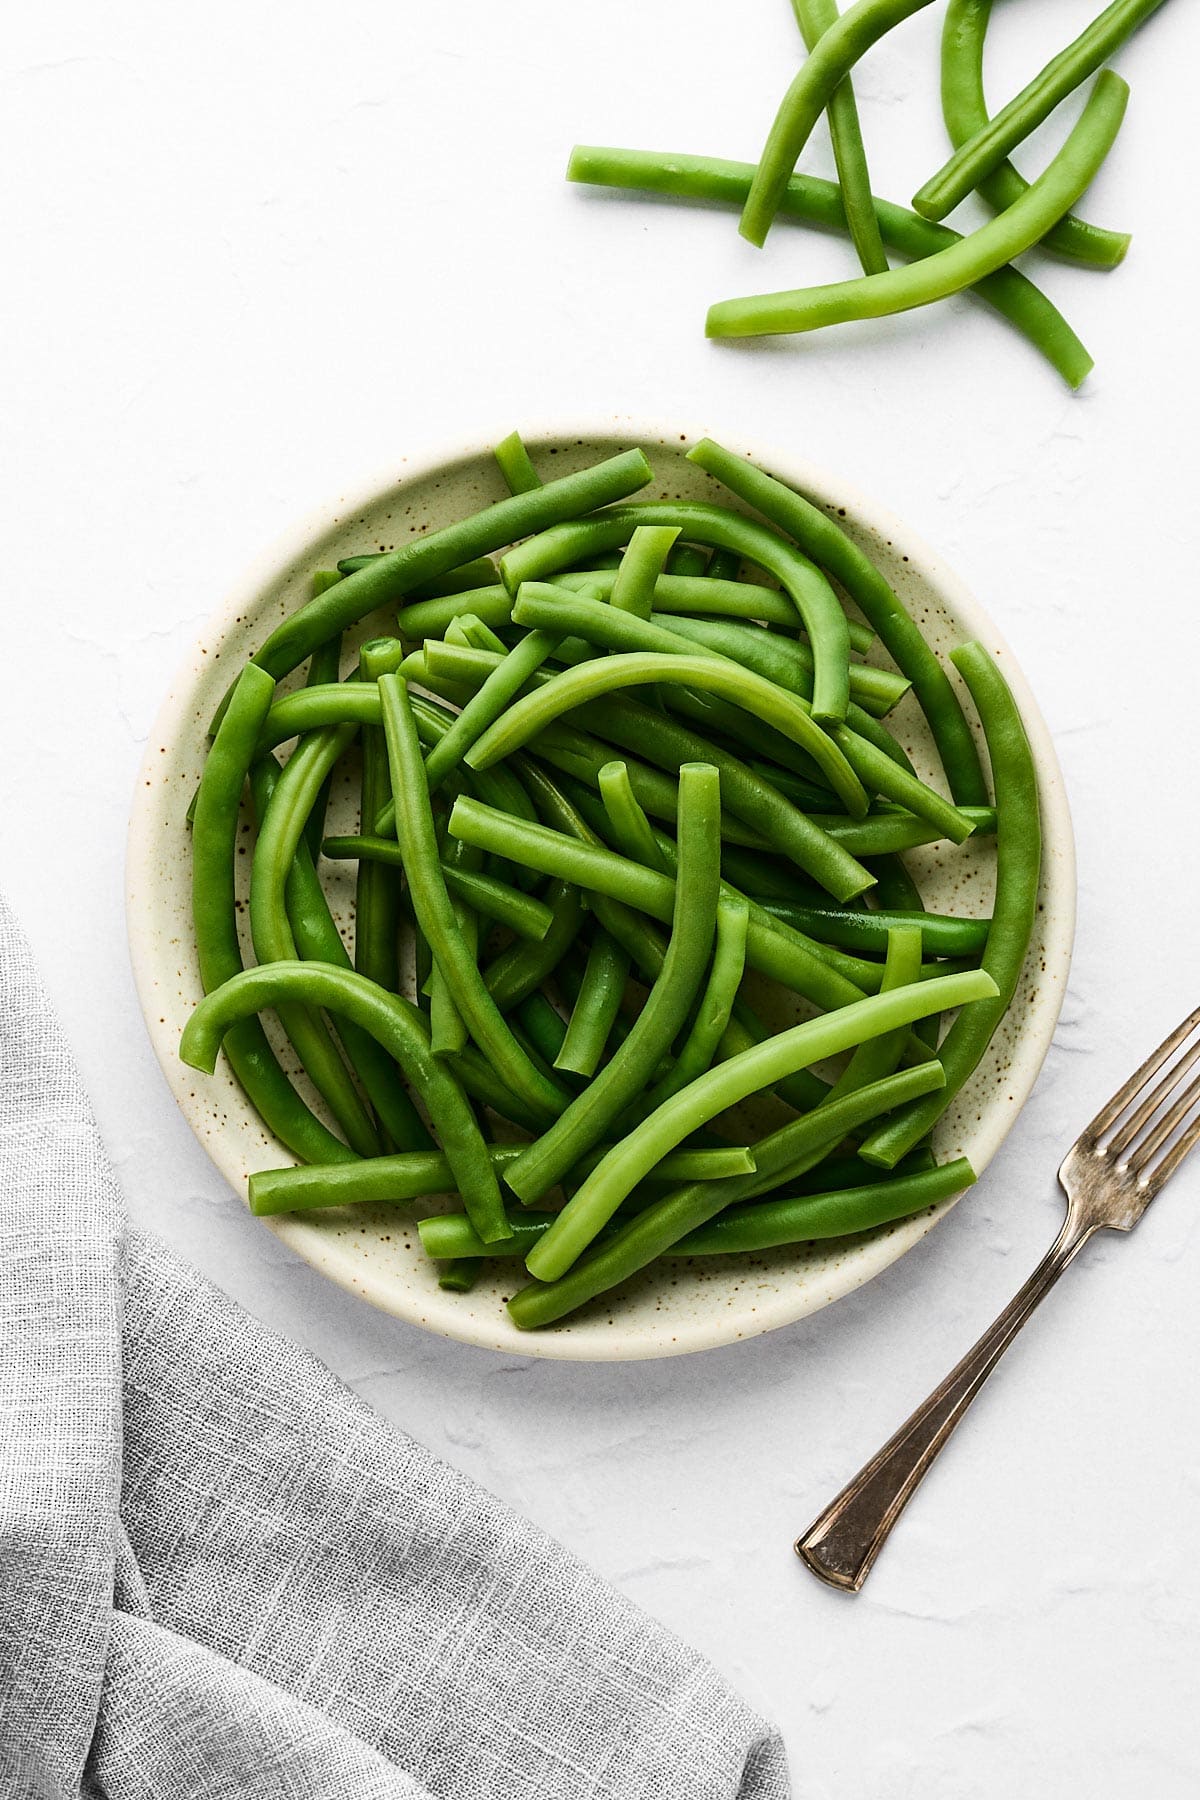 Blanched green beans in a bowl.